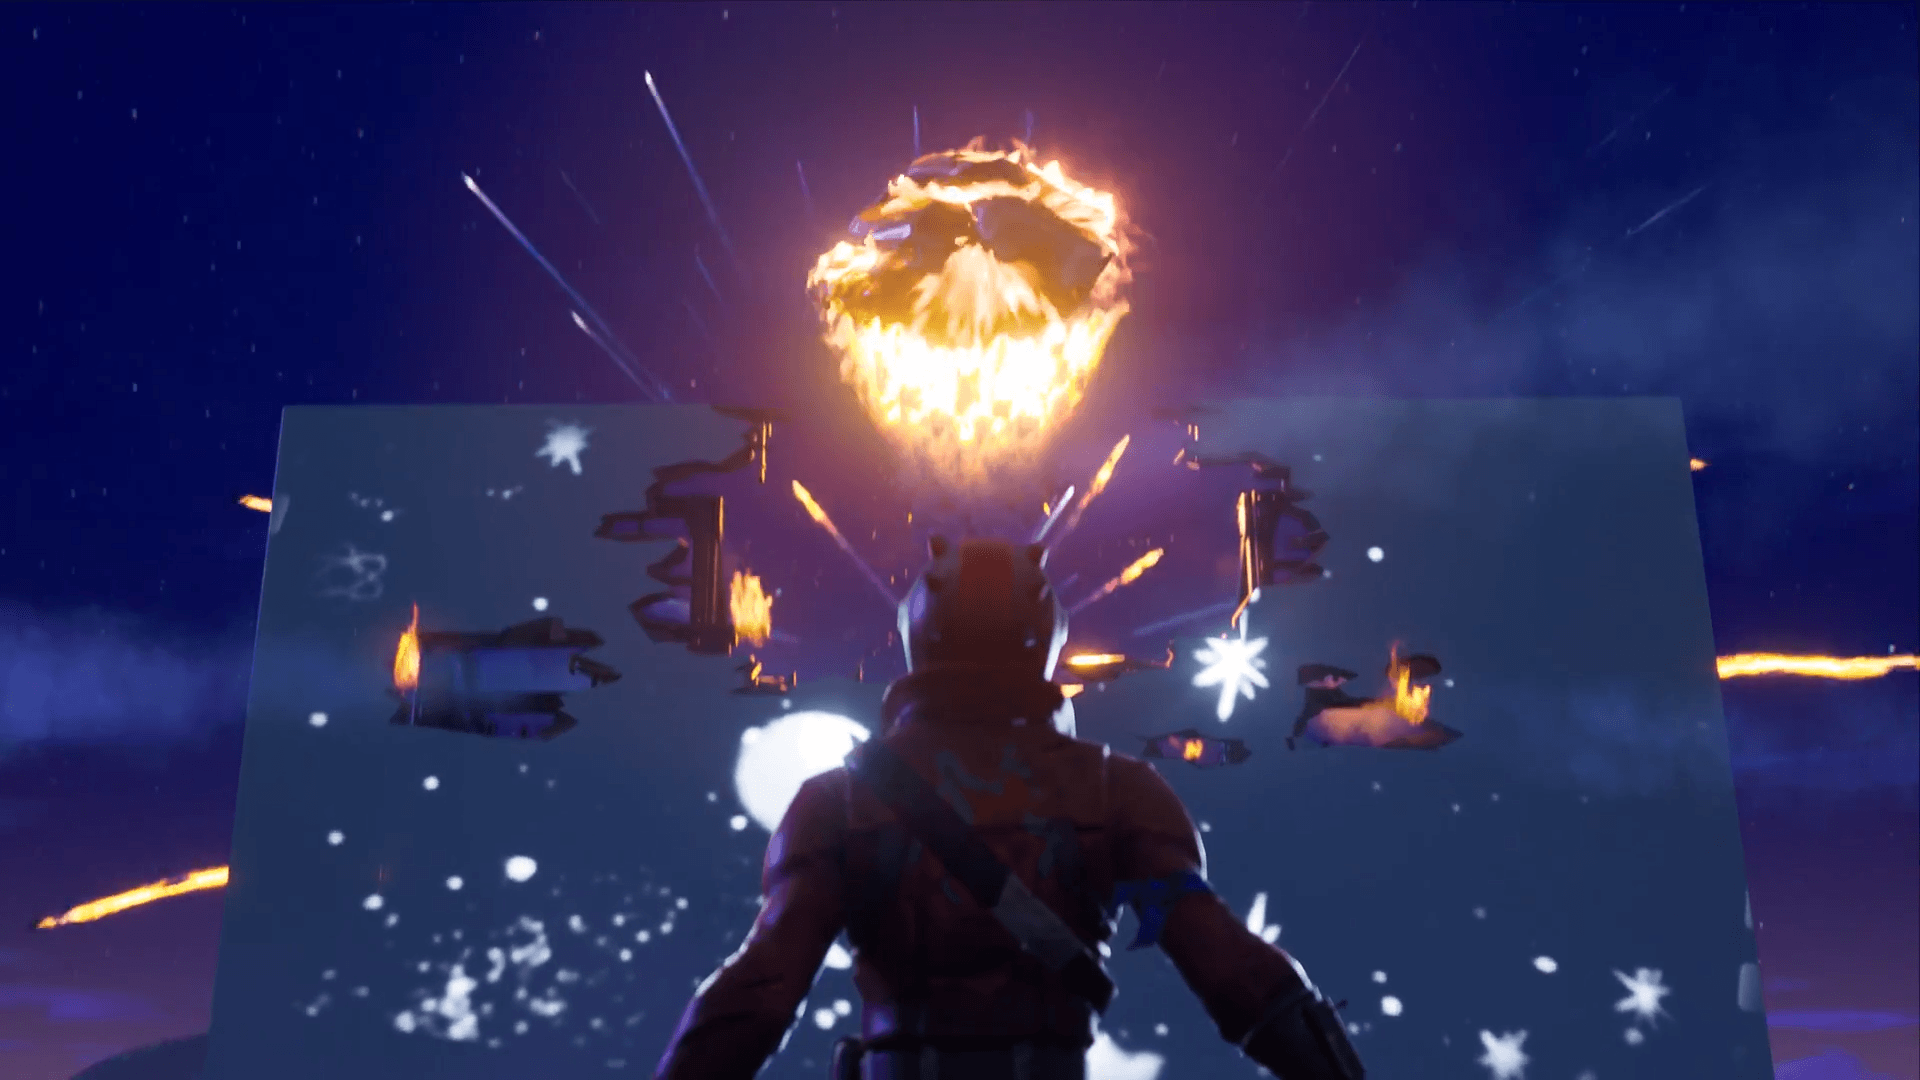 Fortnite Rust Lord Wallpapers